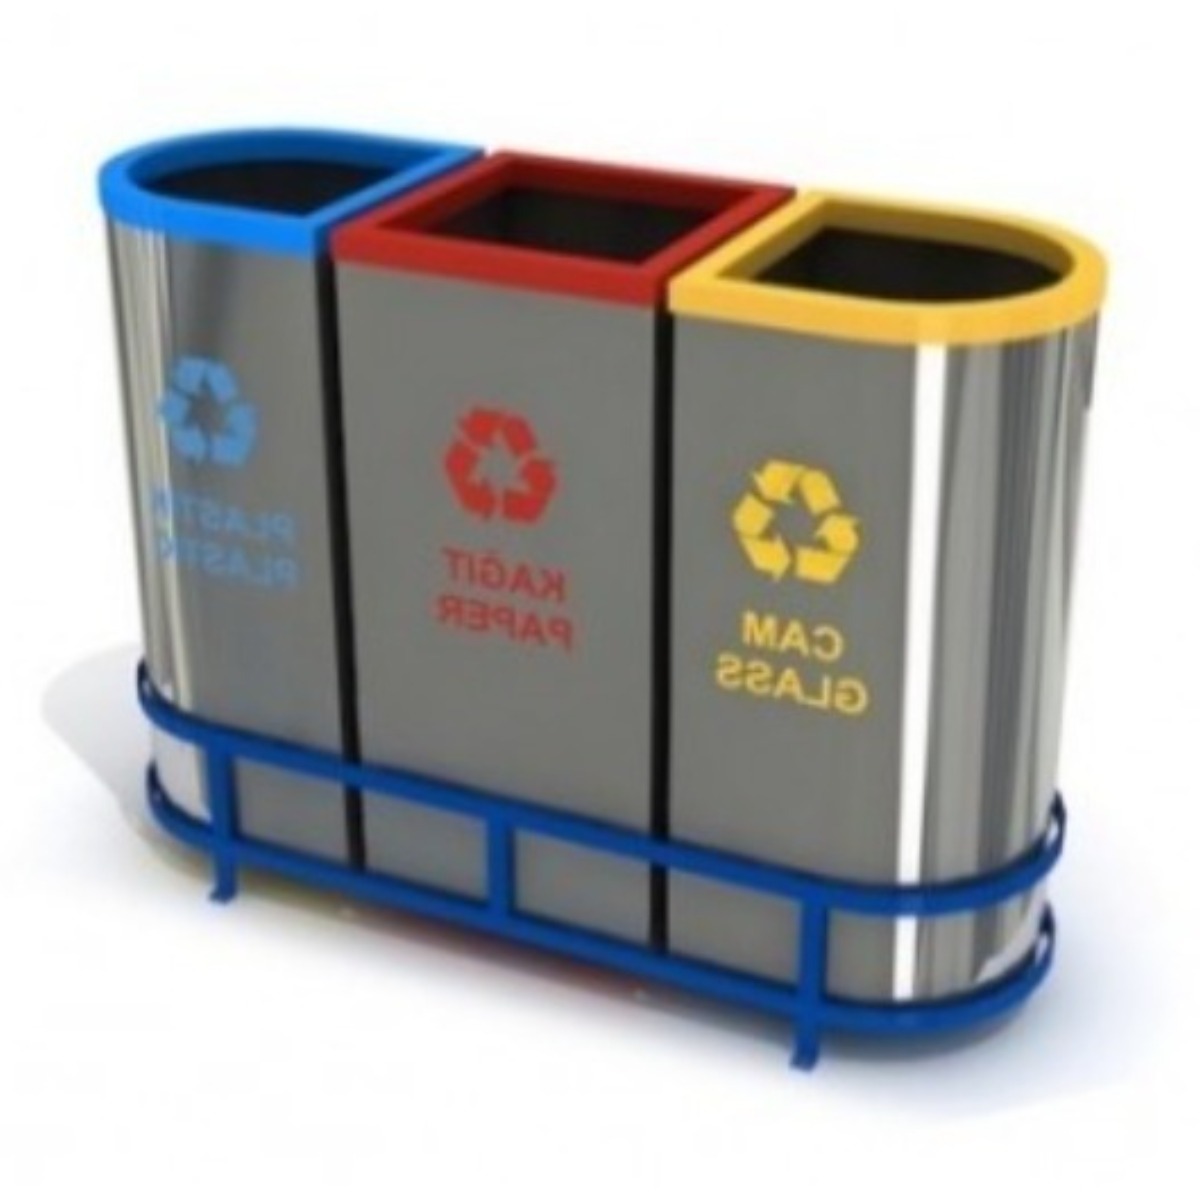 AB-789 3'Part Recycle Bin